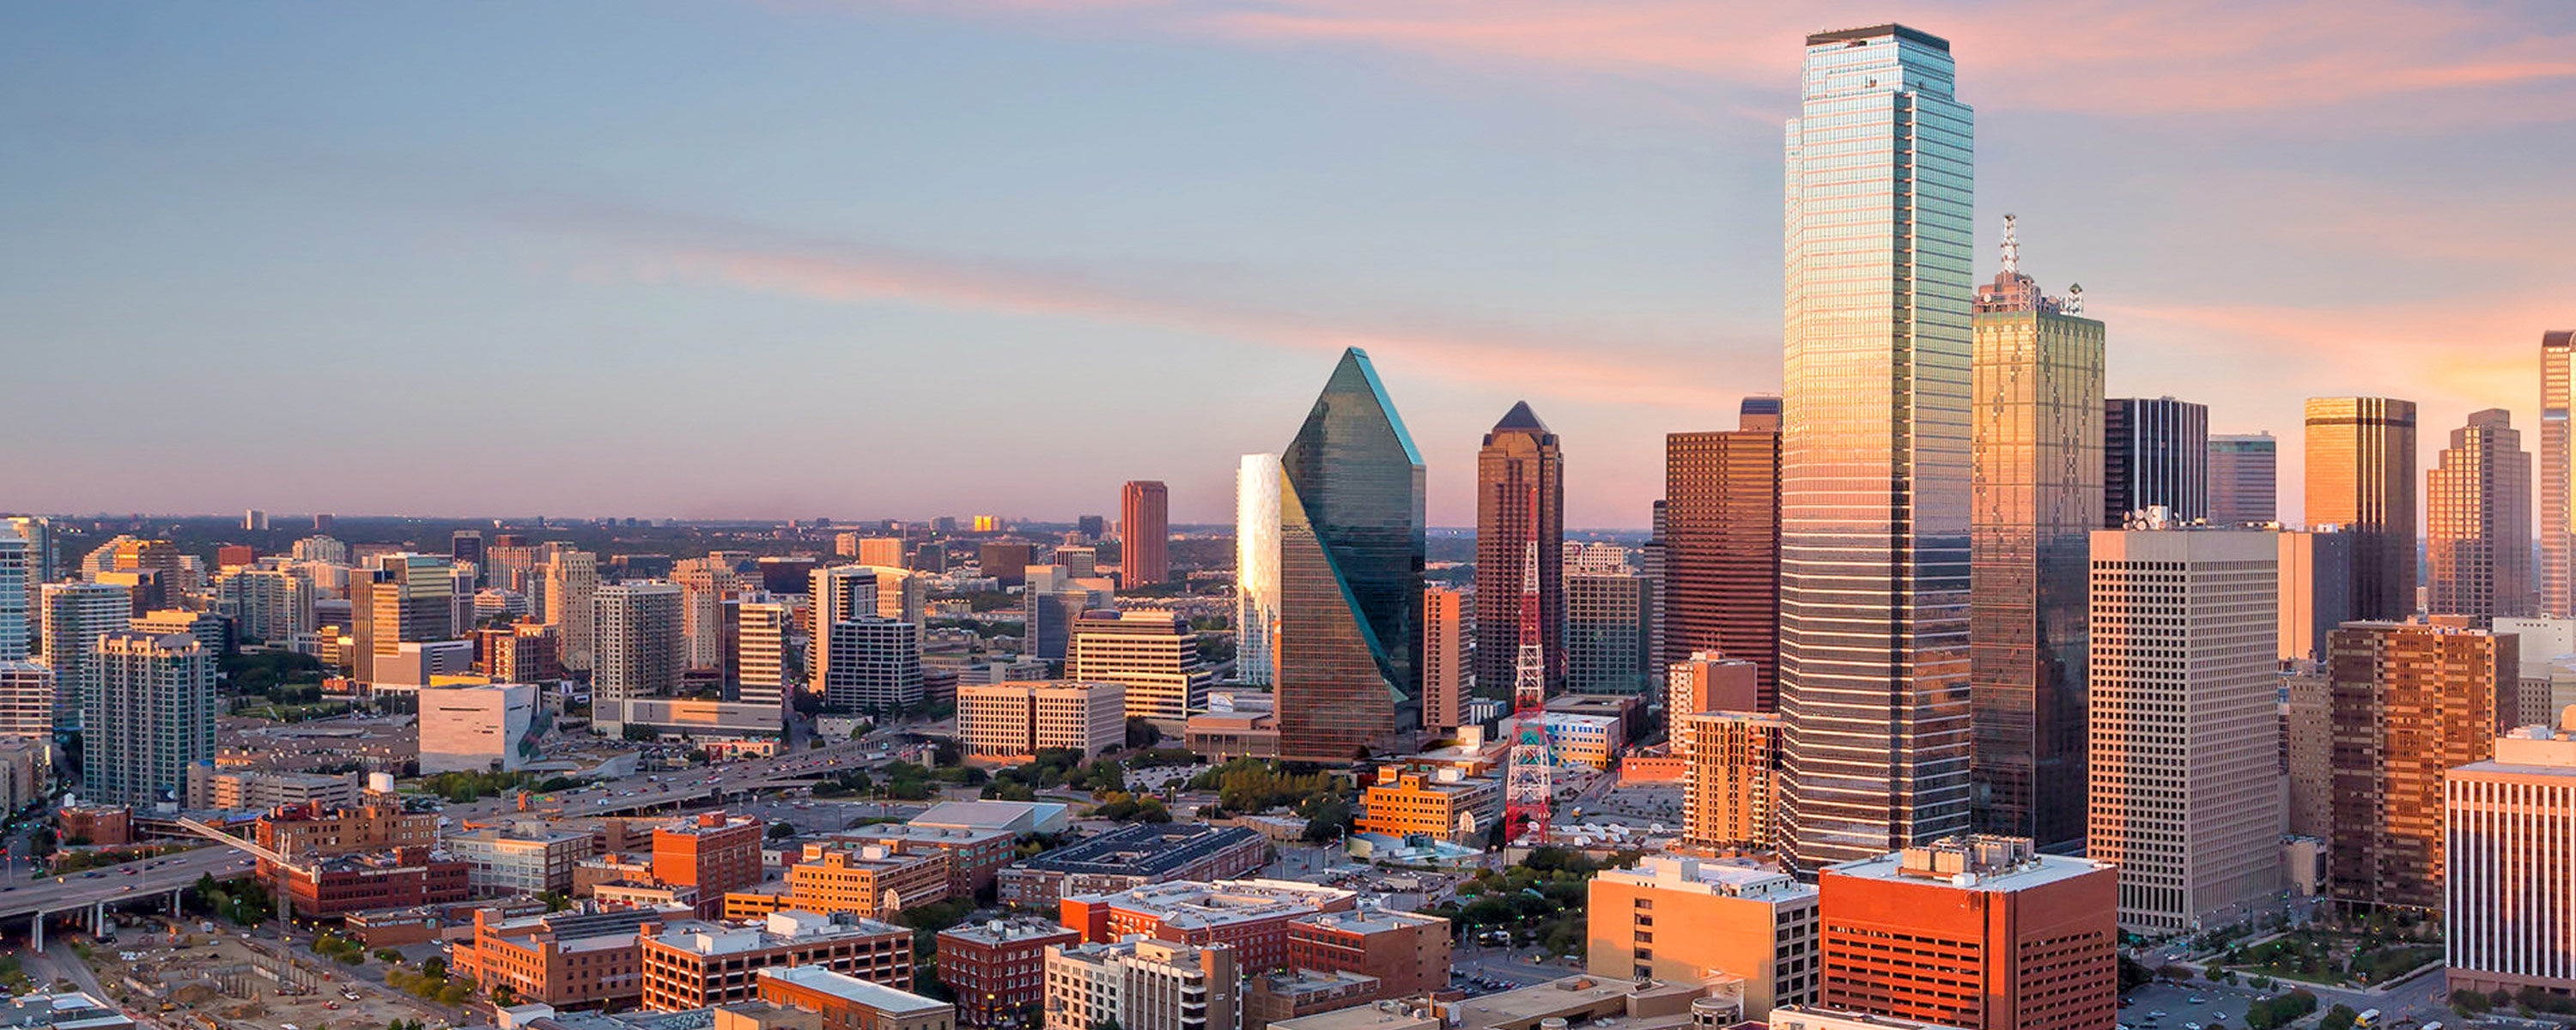 Dallas Data Centers: Empowering Connectivity And Business Agility